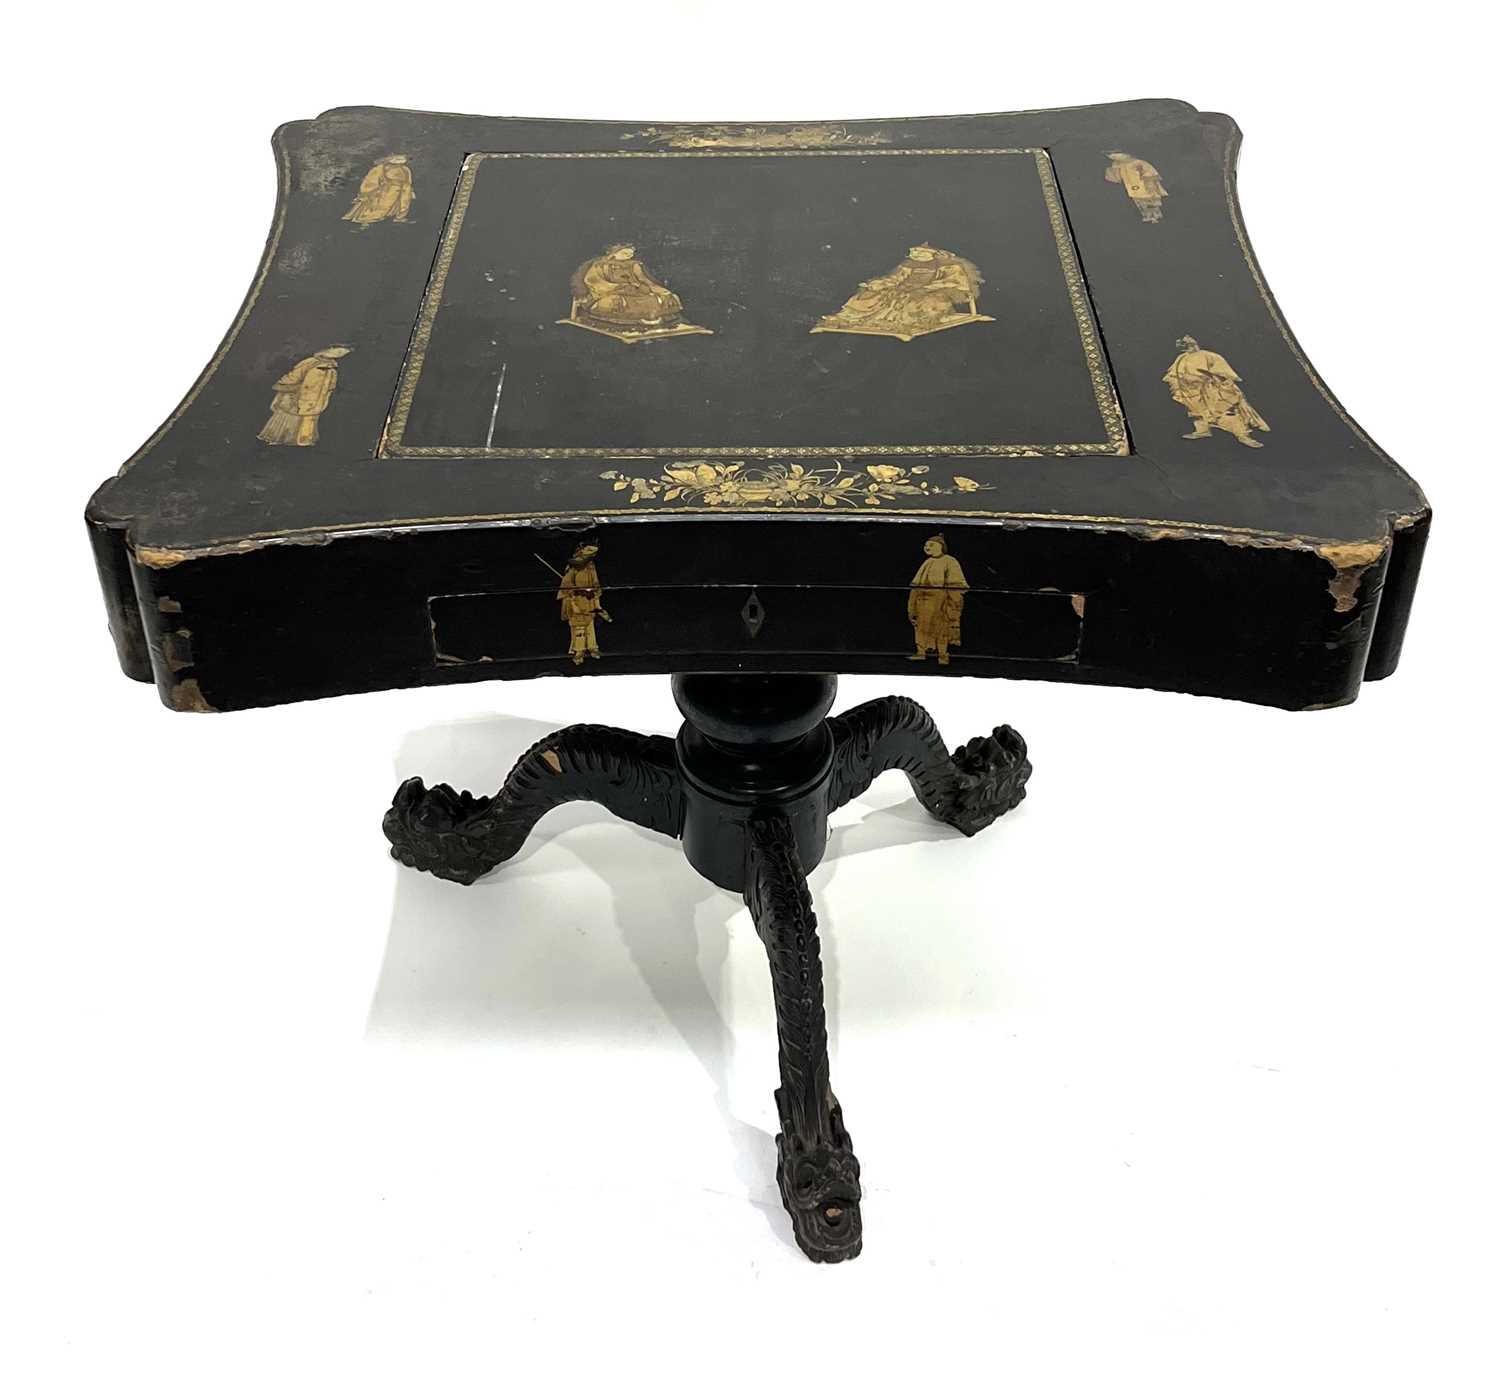 A Chinese black lacquered and gilt games table, Qing Dynasty, inverted top decorated with gilt